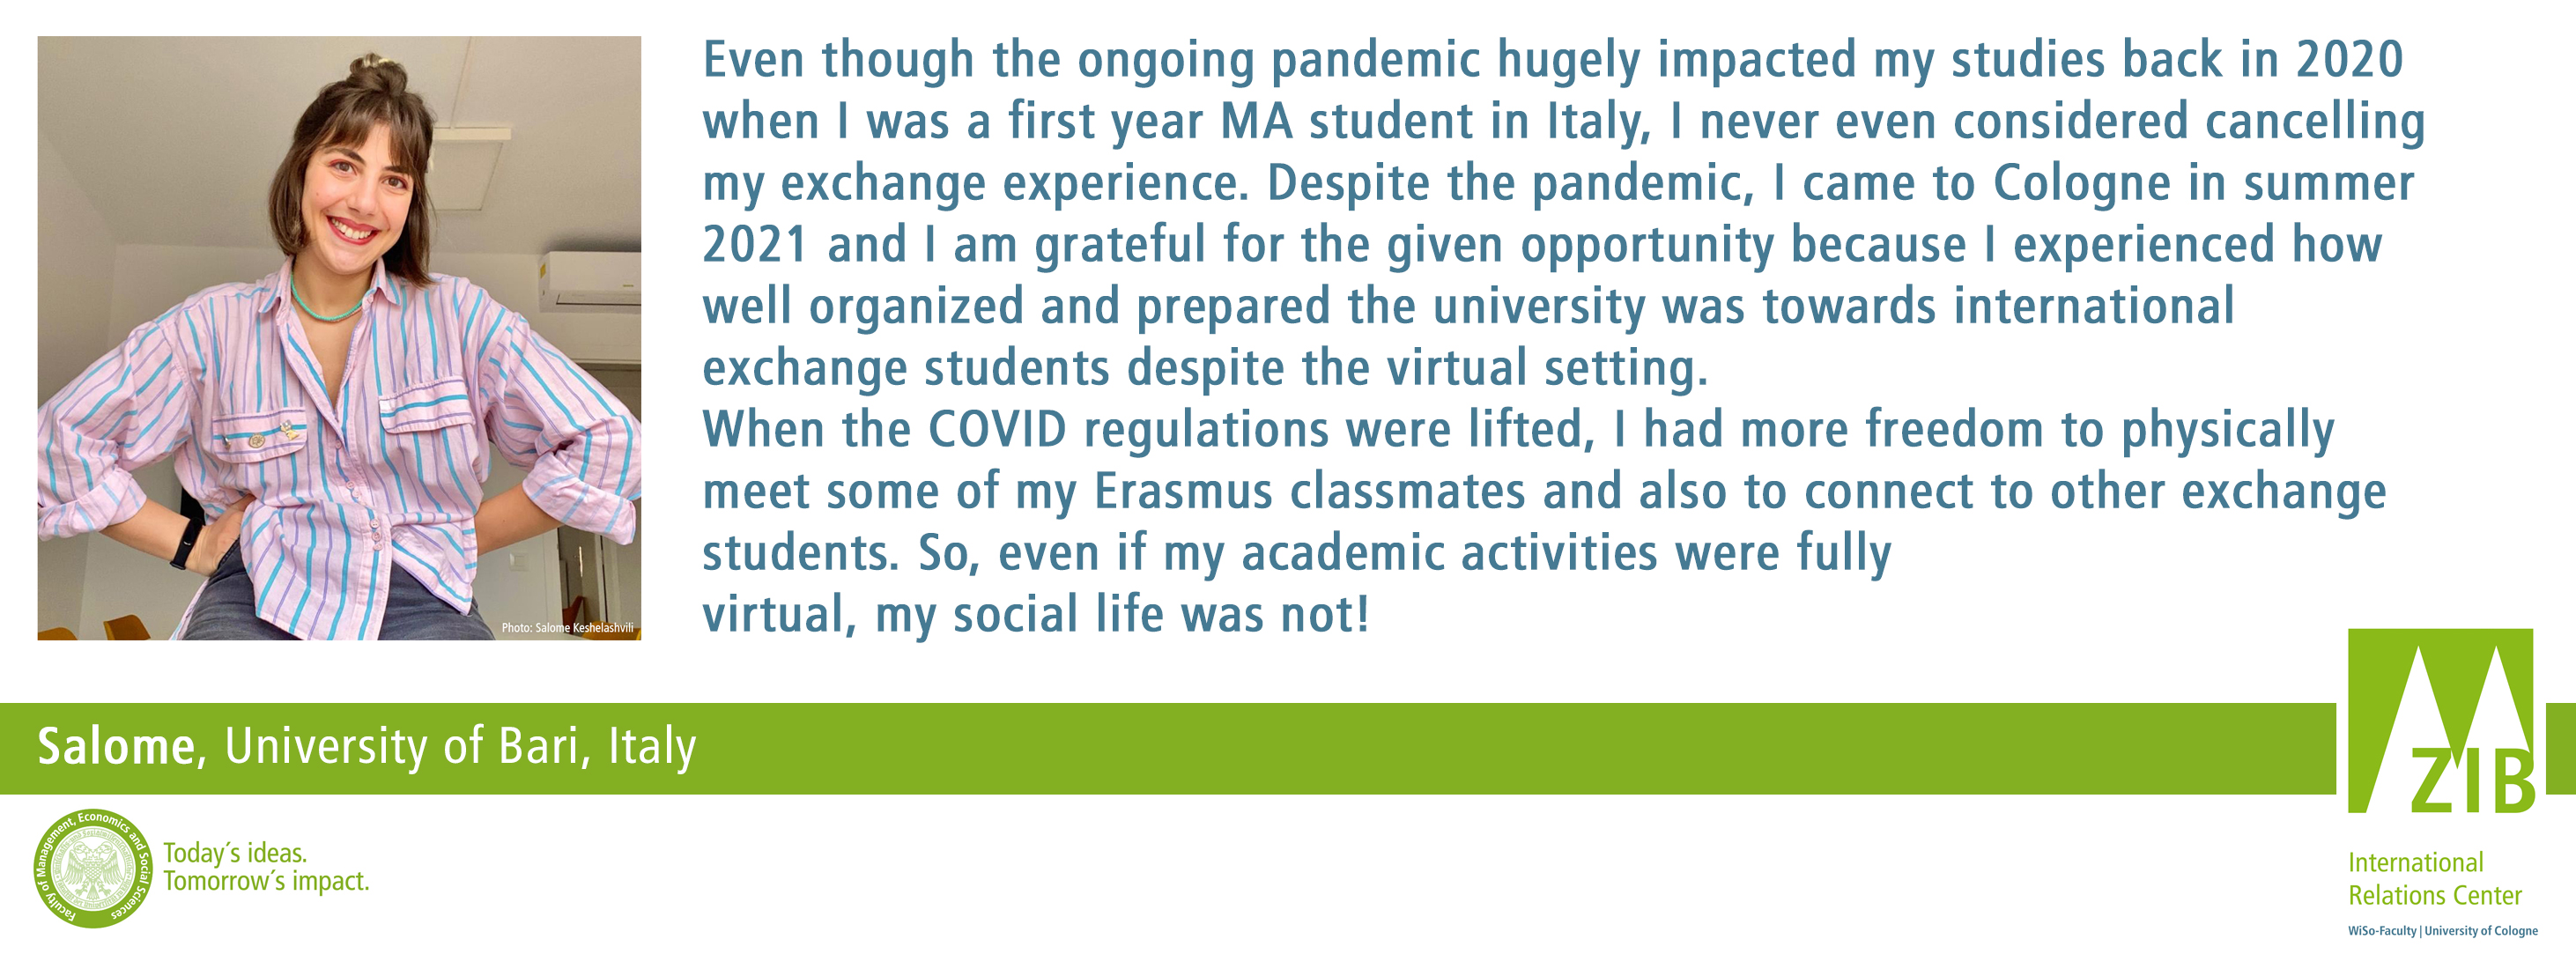 Even though the ongoing pandemic hugely impacted my studies back in 2020 when I was a first year MA student in Italy, I never even considered cancelling my exchange experience. Despite the pandemic, I came to Cologne in summer 2021 and I am grateful for the given opportunity because I experienced how well organized and prepared the university was towards international exchange students despite the virtual setting. When the COVID regulations were lifted, I had more freedom to physically meet some of my Erasmus classmates and also to connect to other exchange students. So, even if my academic activities were fully  virtual, my social life was not!